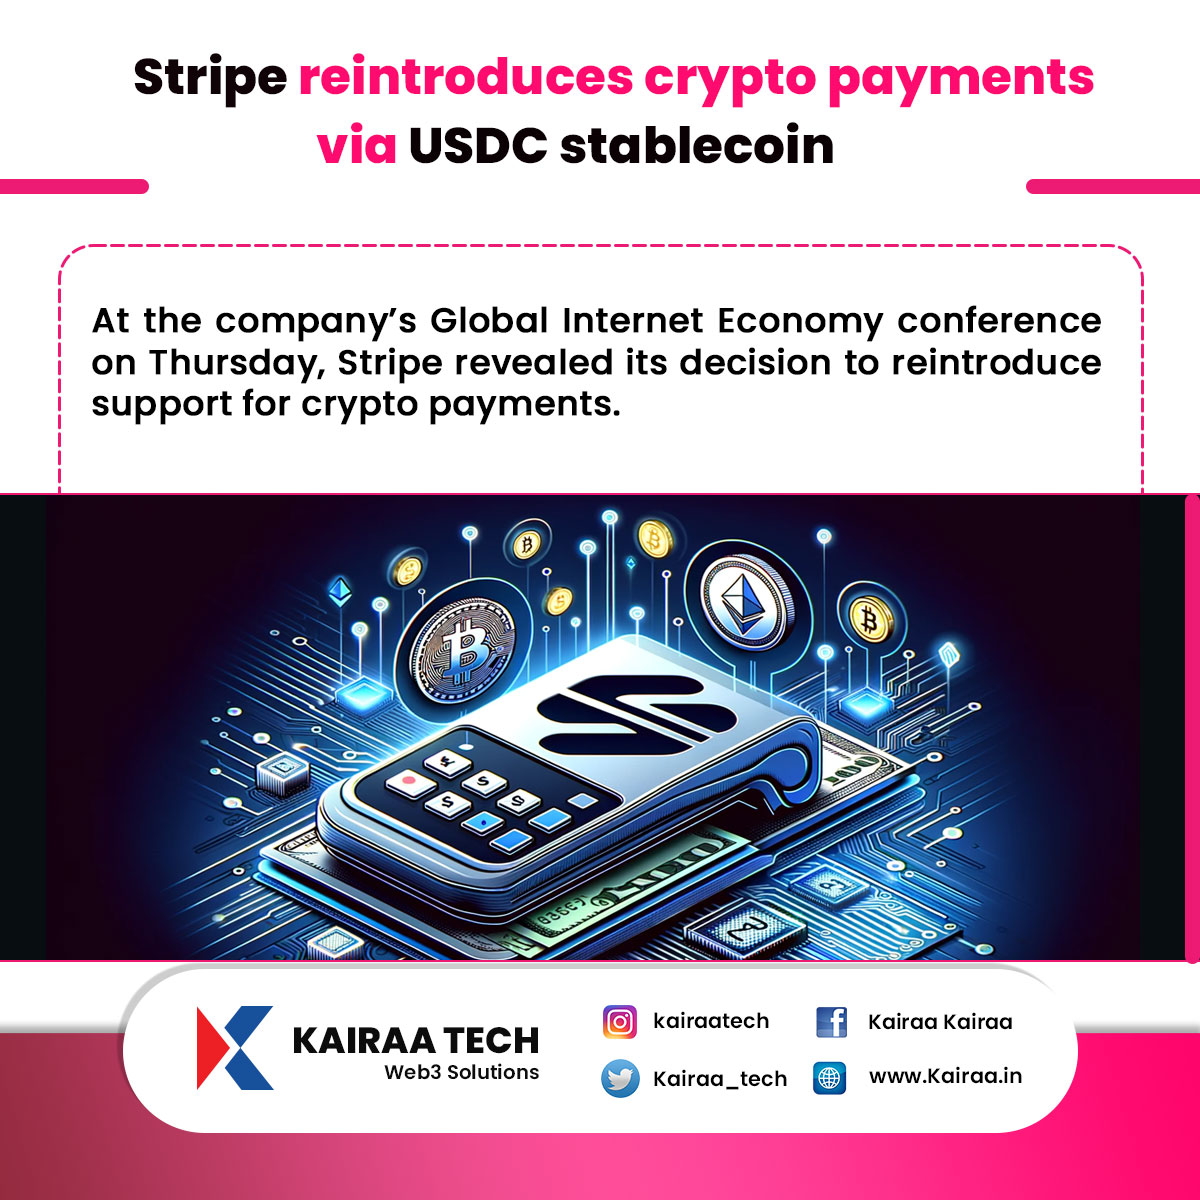 Stripe reintroduces cryptocurrency payments using USDC stablecoin.

For more details and updates.
Website: kairaa.in
Mail Id: Support@kairaatechserve.com

#kairaa #techserve #striper #crypto #stablecoin #cryptocurrency #usdc #technology #follow #like #socialmedia